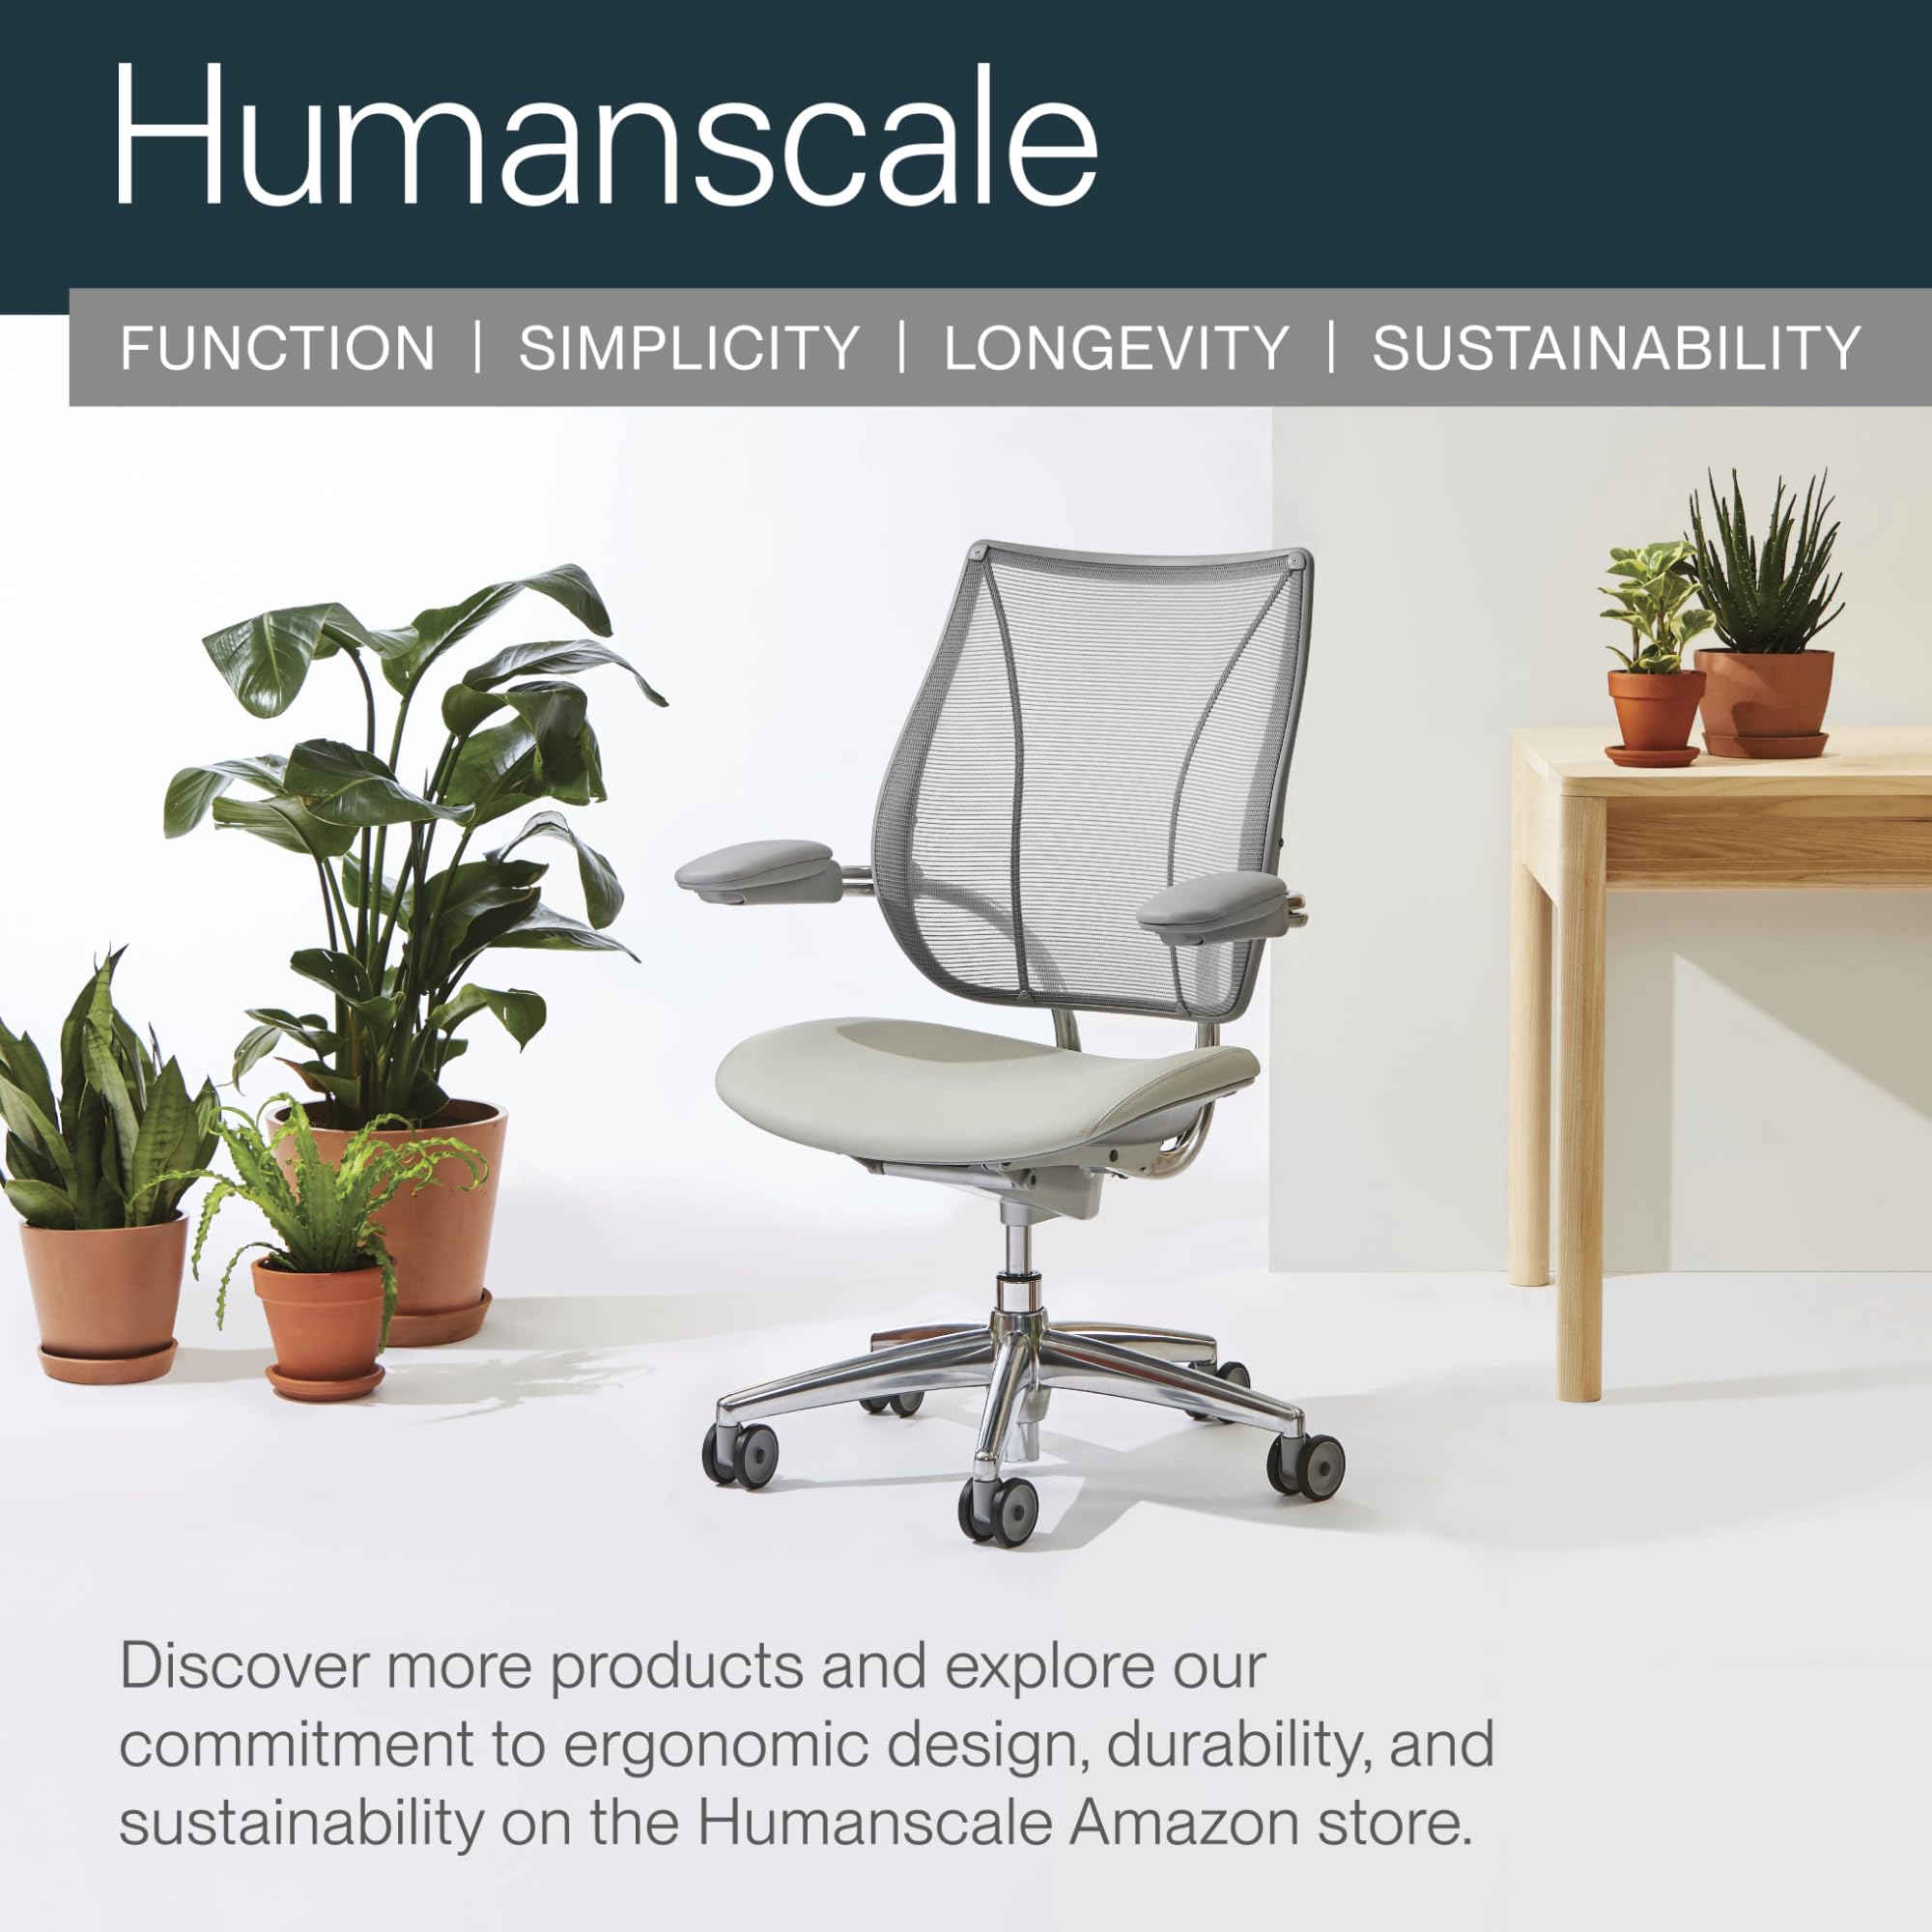 Humanscale ProClick White Ergonomic Mouse, Wireless Bluetooth Compatibility with PC or Mac, Multi-Device Connectivity, Comfort Contour Design, 8 Programmable Buttons